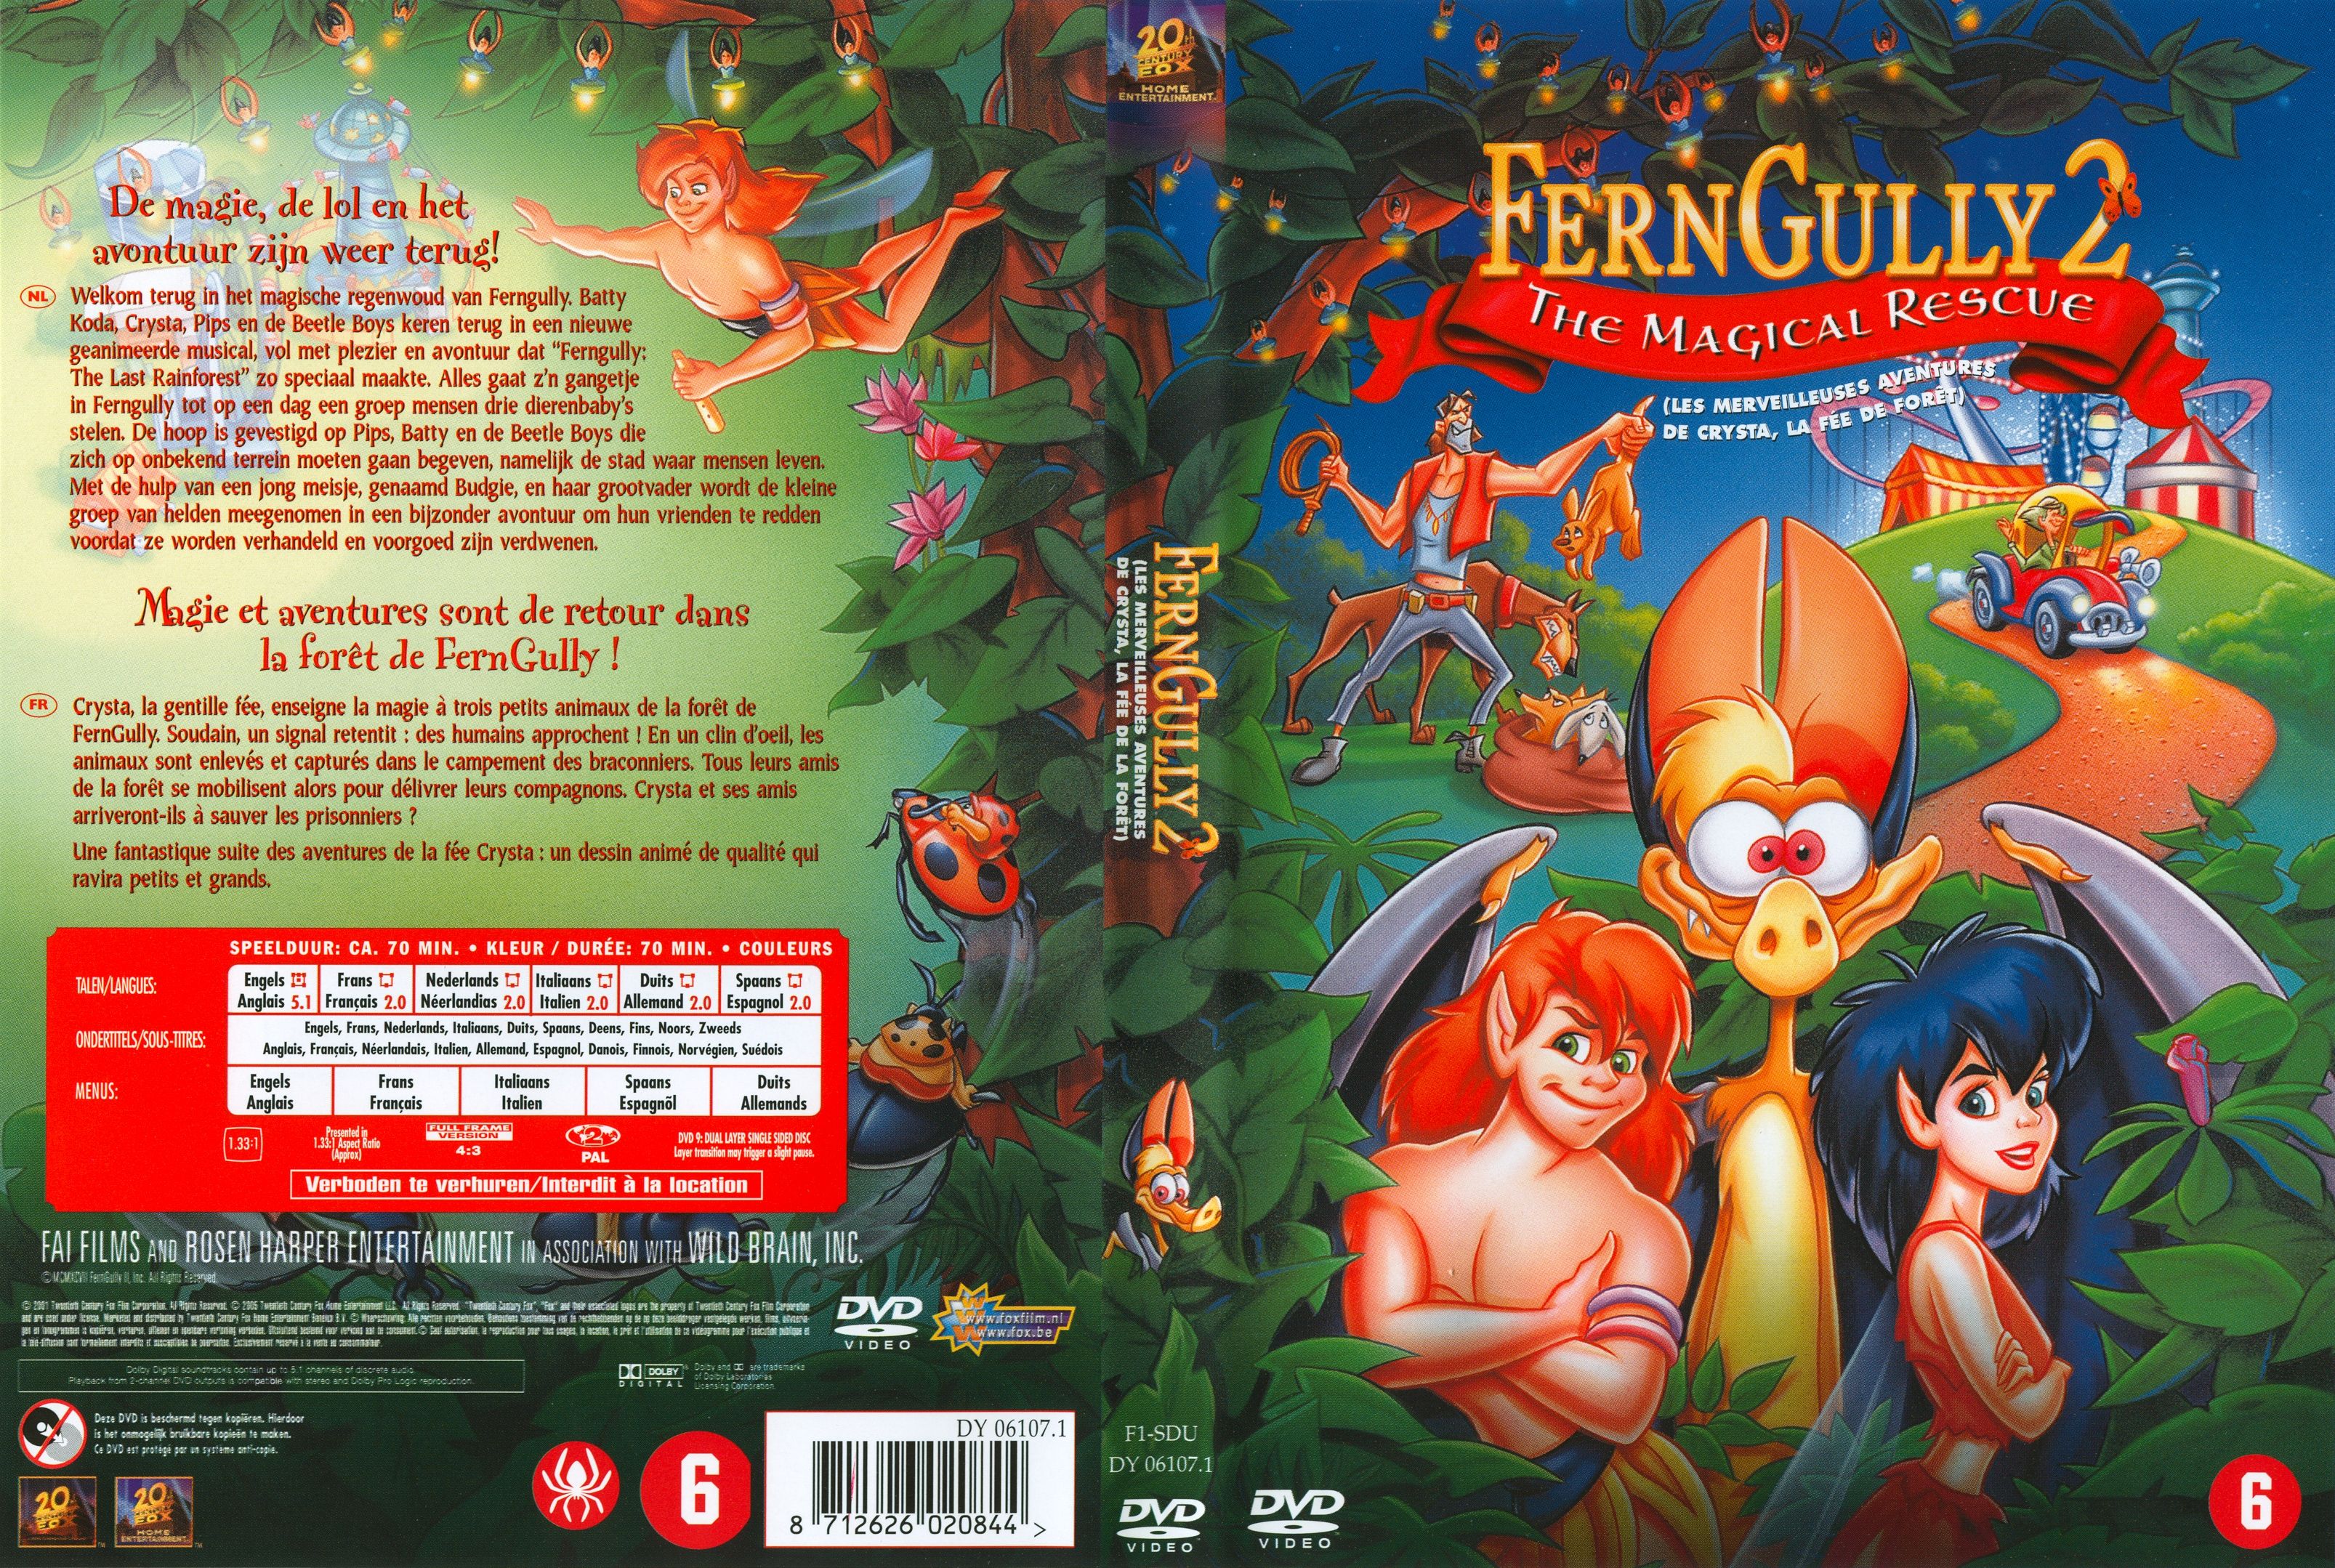 Jaquette DVD FernGully 2